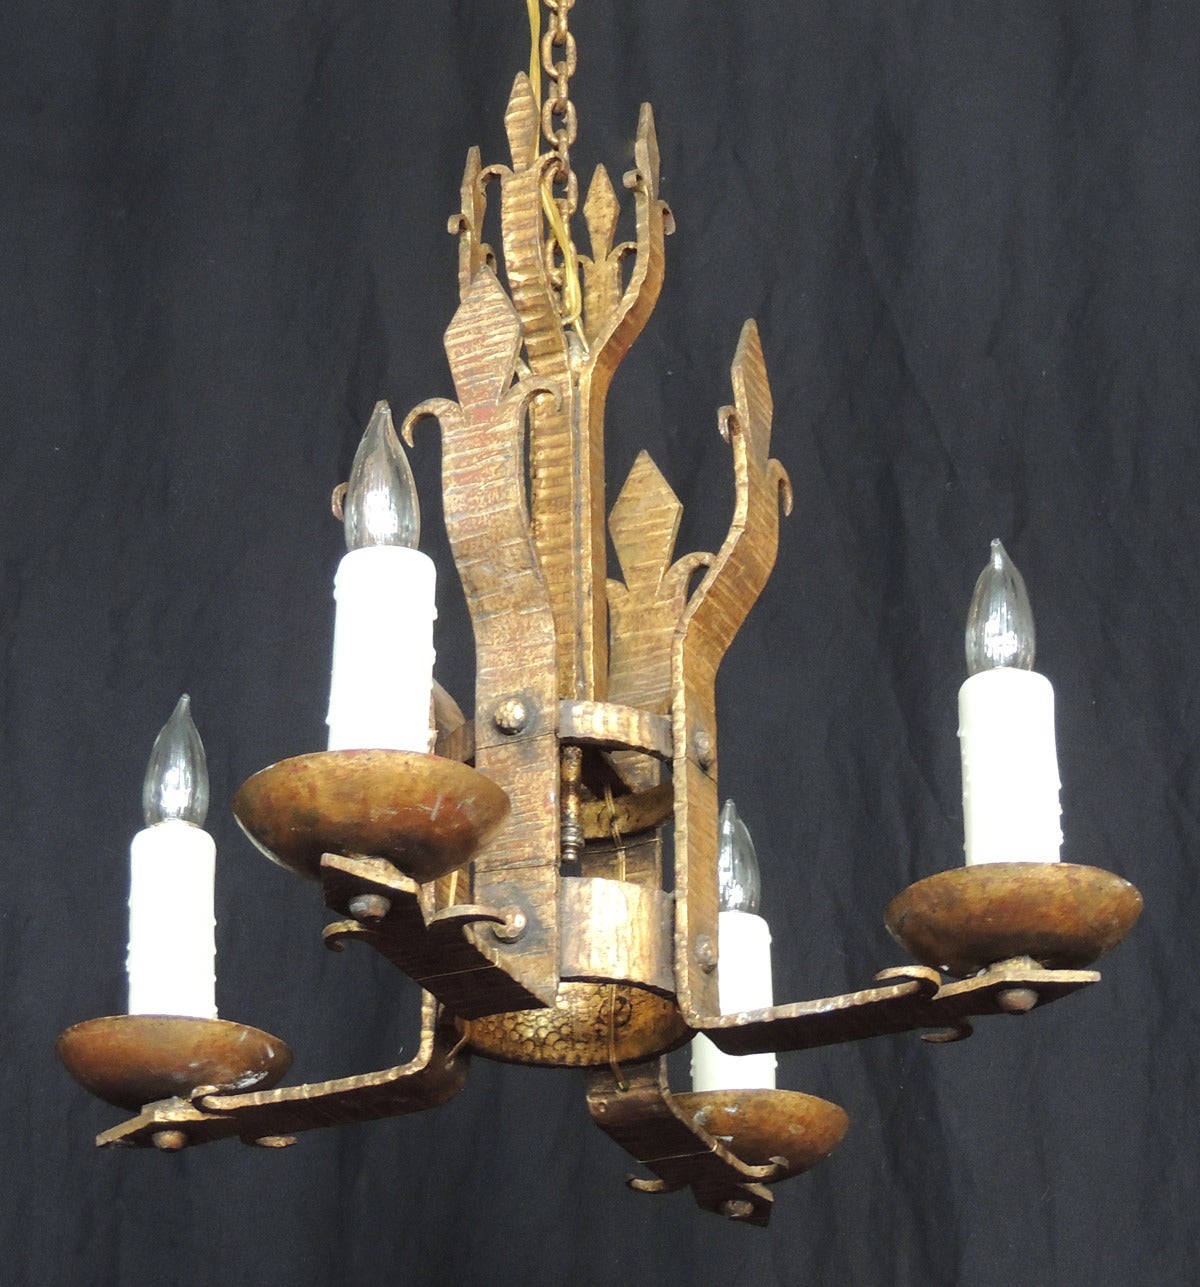 This chandelier was made in Barcelona, Spain in the early 20th century, circa 1910. It was made to reflect a Mediterranean style with Prince of Wales plumes at the top and center of the chandelier. The piece has four arms that have been recently